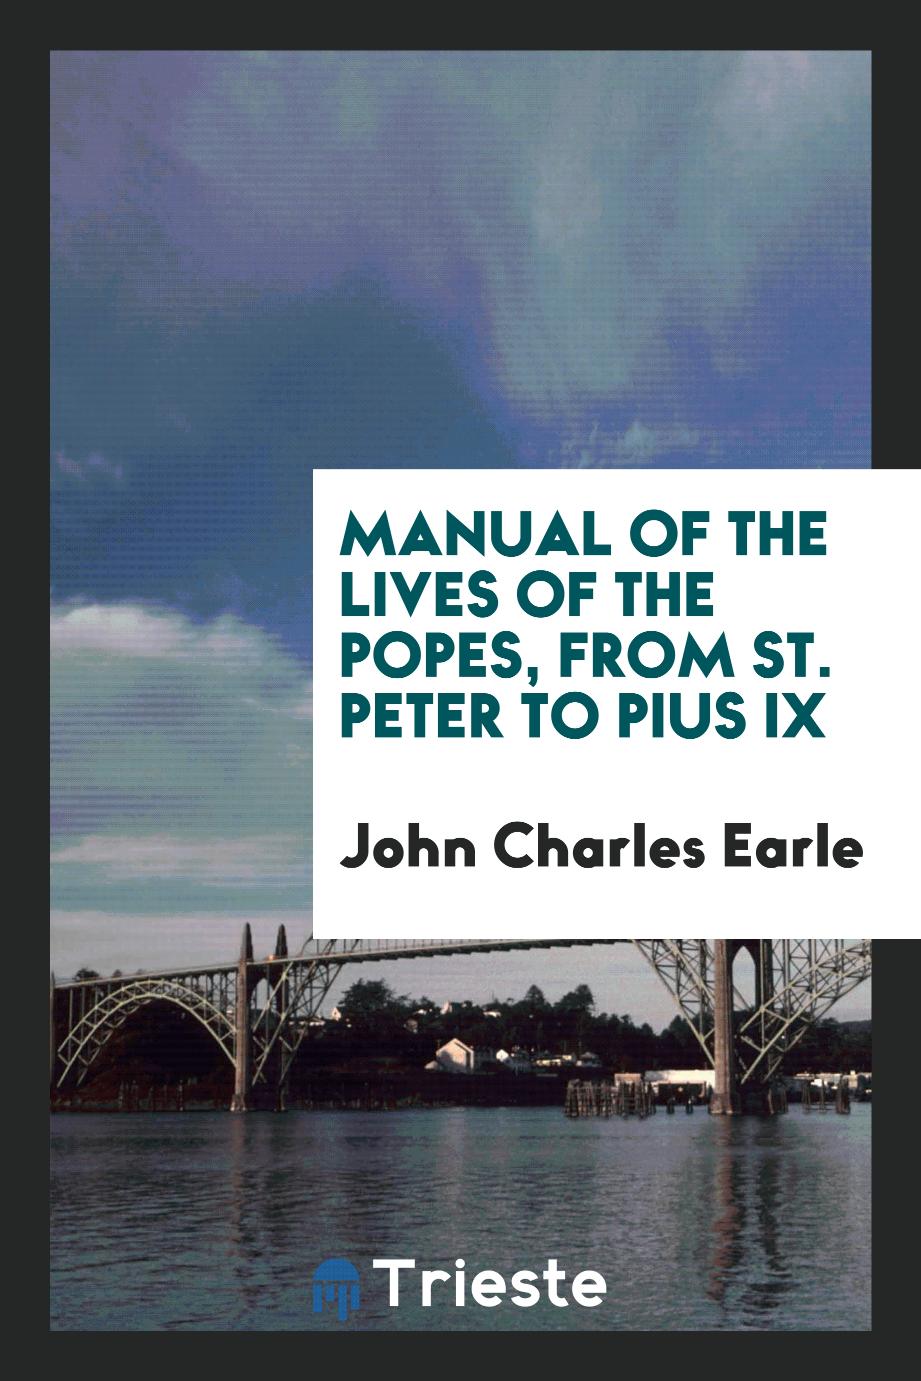 Manual of the Lives of the Popes, from St. Peter to Pius IX